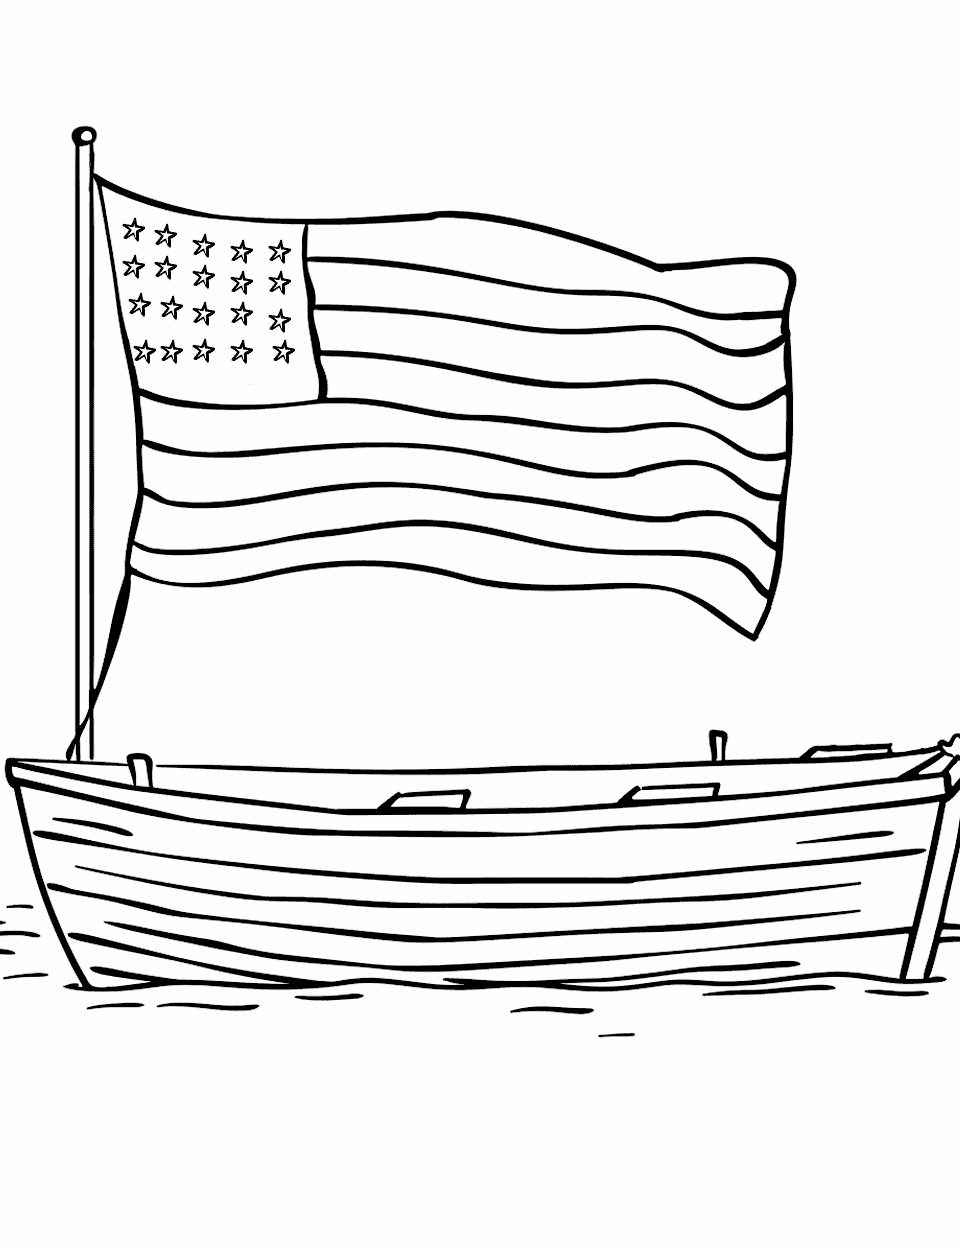 American Flag on a Boat Coloring Page - A small boat on a lake with the American flag waving at the stern.